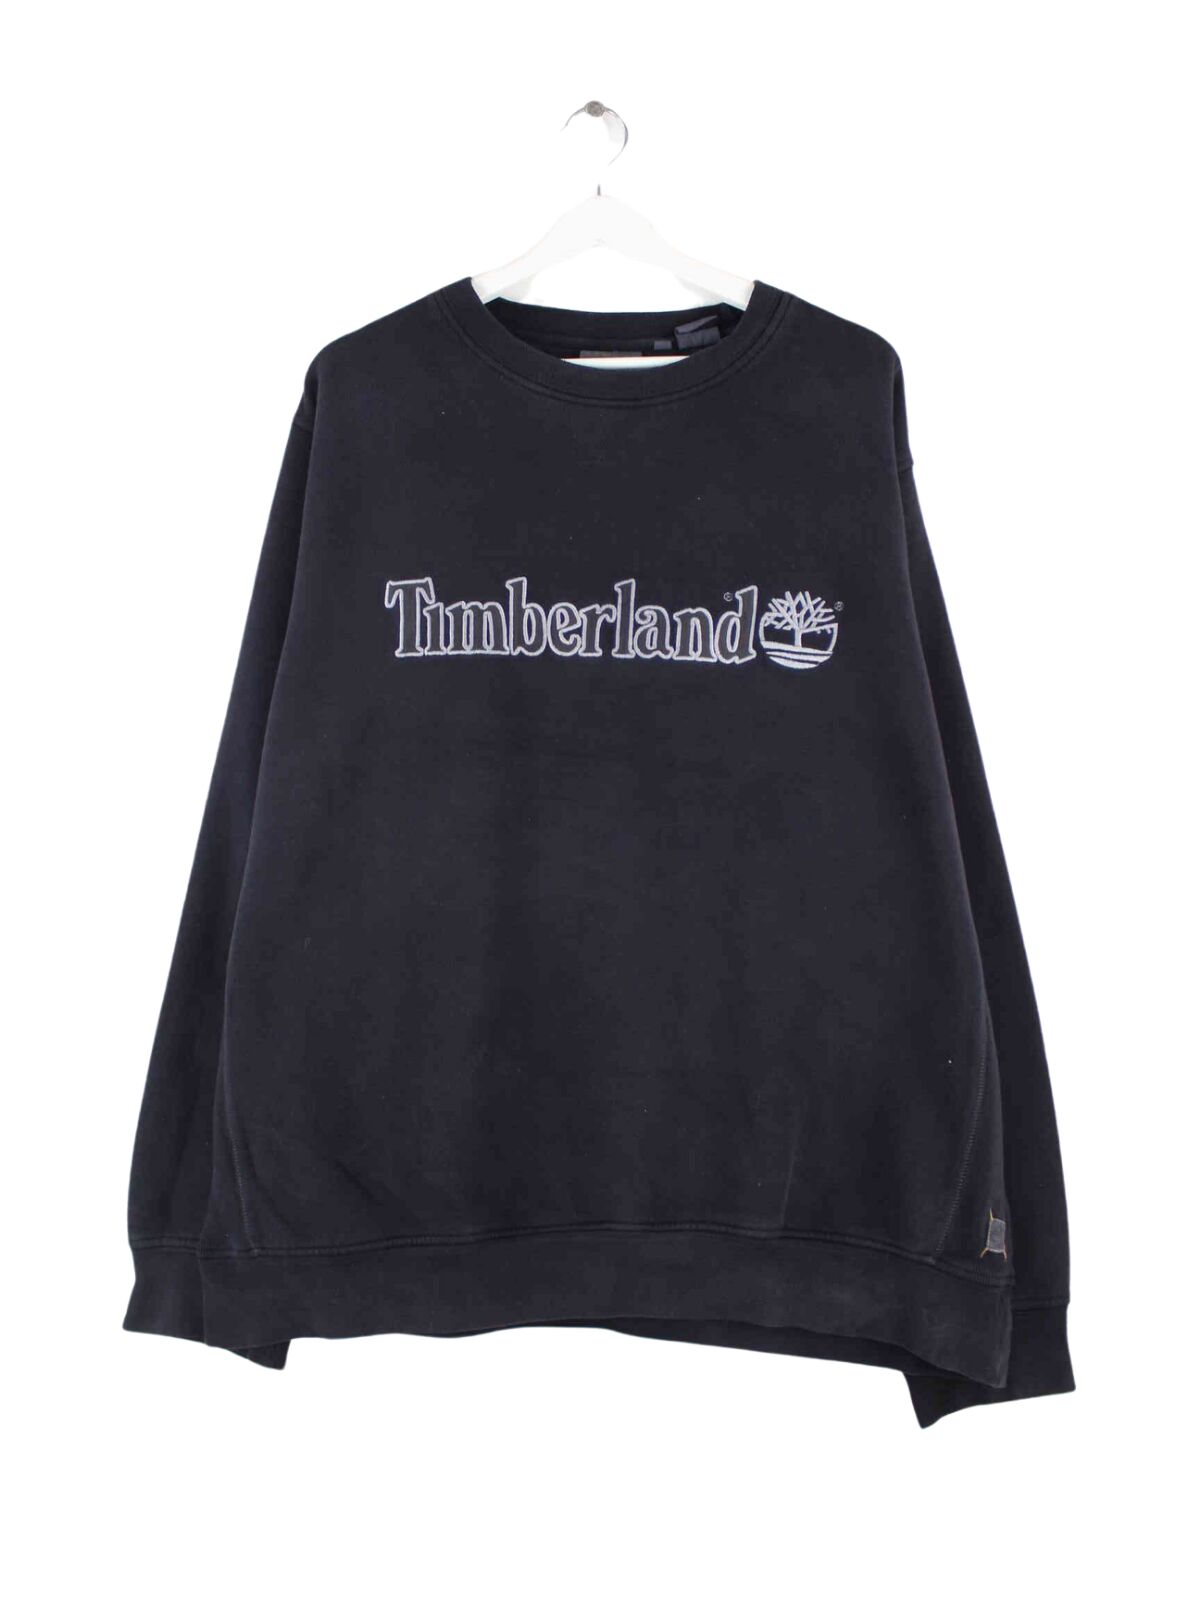 Timberland Logo Embroidered Sweater Schwarz XL (front image)